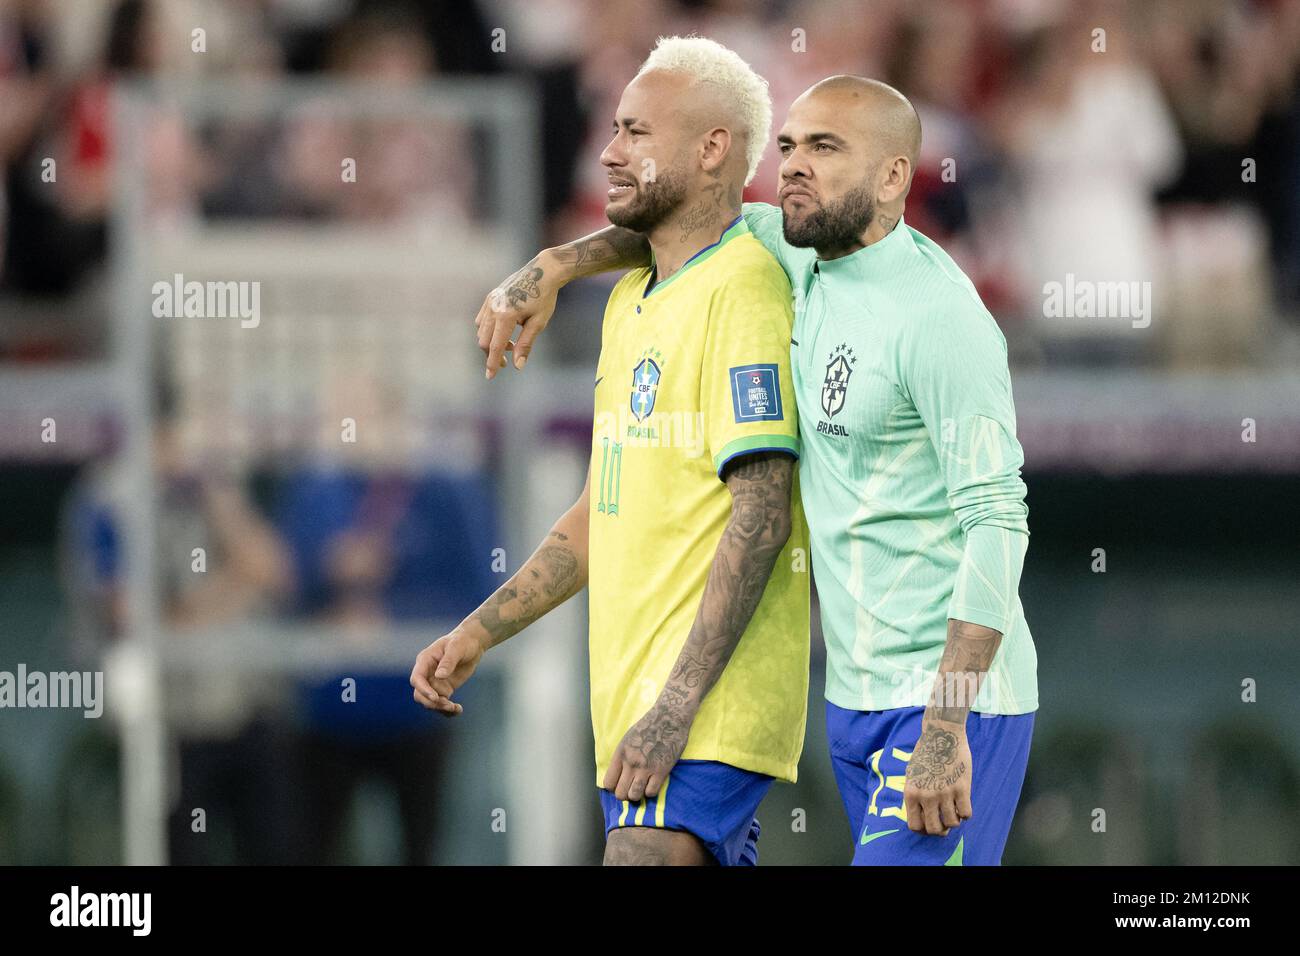 Doha, Qatar. 09th Dec, 2022. Doha, Qatar. 09th Dec, 2022. Neymar Jr and Dani Alves of Brazil look dejected after their sides' elimination from the tournament after a penalty shoot out loss during the FIFA World Cup Qatar 2022 quarter final match between Croatia and Brazil at Education City Stadium on December 09, 2022 in Doha, Qatar. Photo by David Niviere/ABACAPRESS.COM Credit: Abaca Press/Alamy Live News Credit: Abaca Press/Alamy Live News Credit: Abaca Press/Alamy Live News Stock Photo